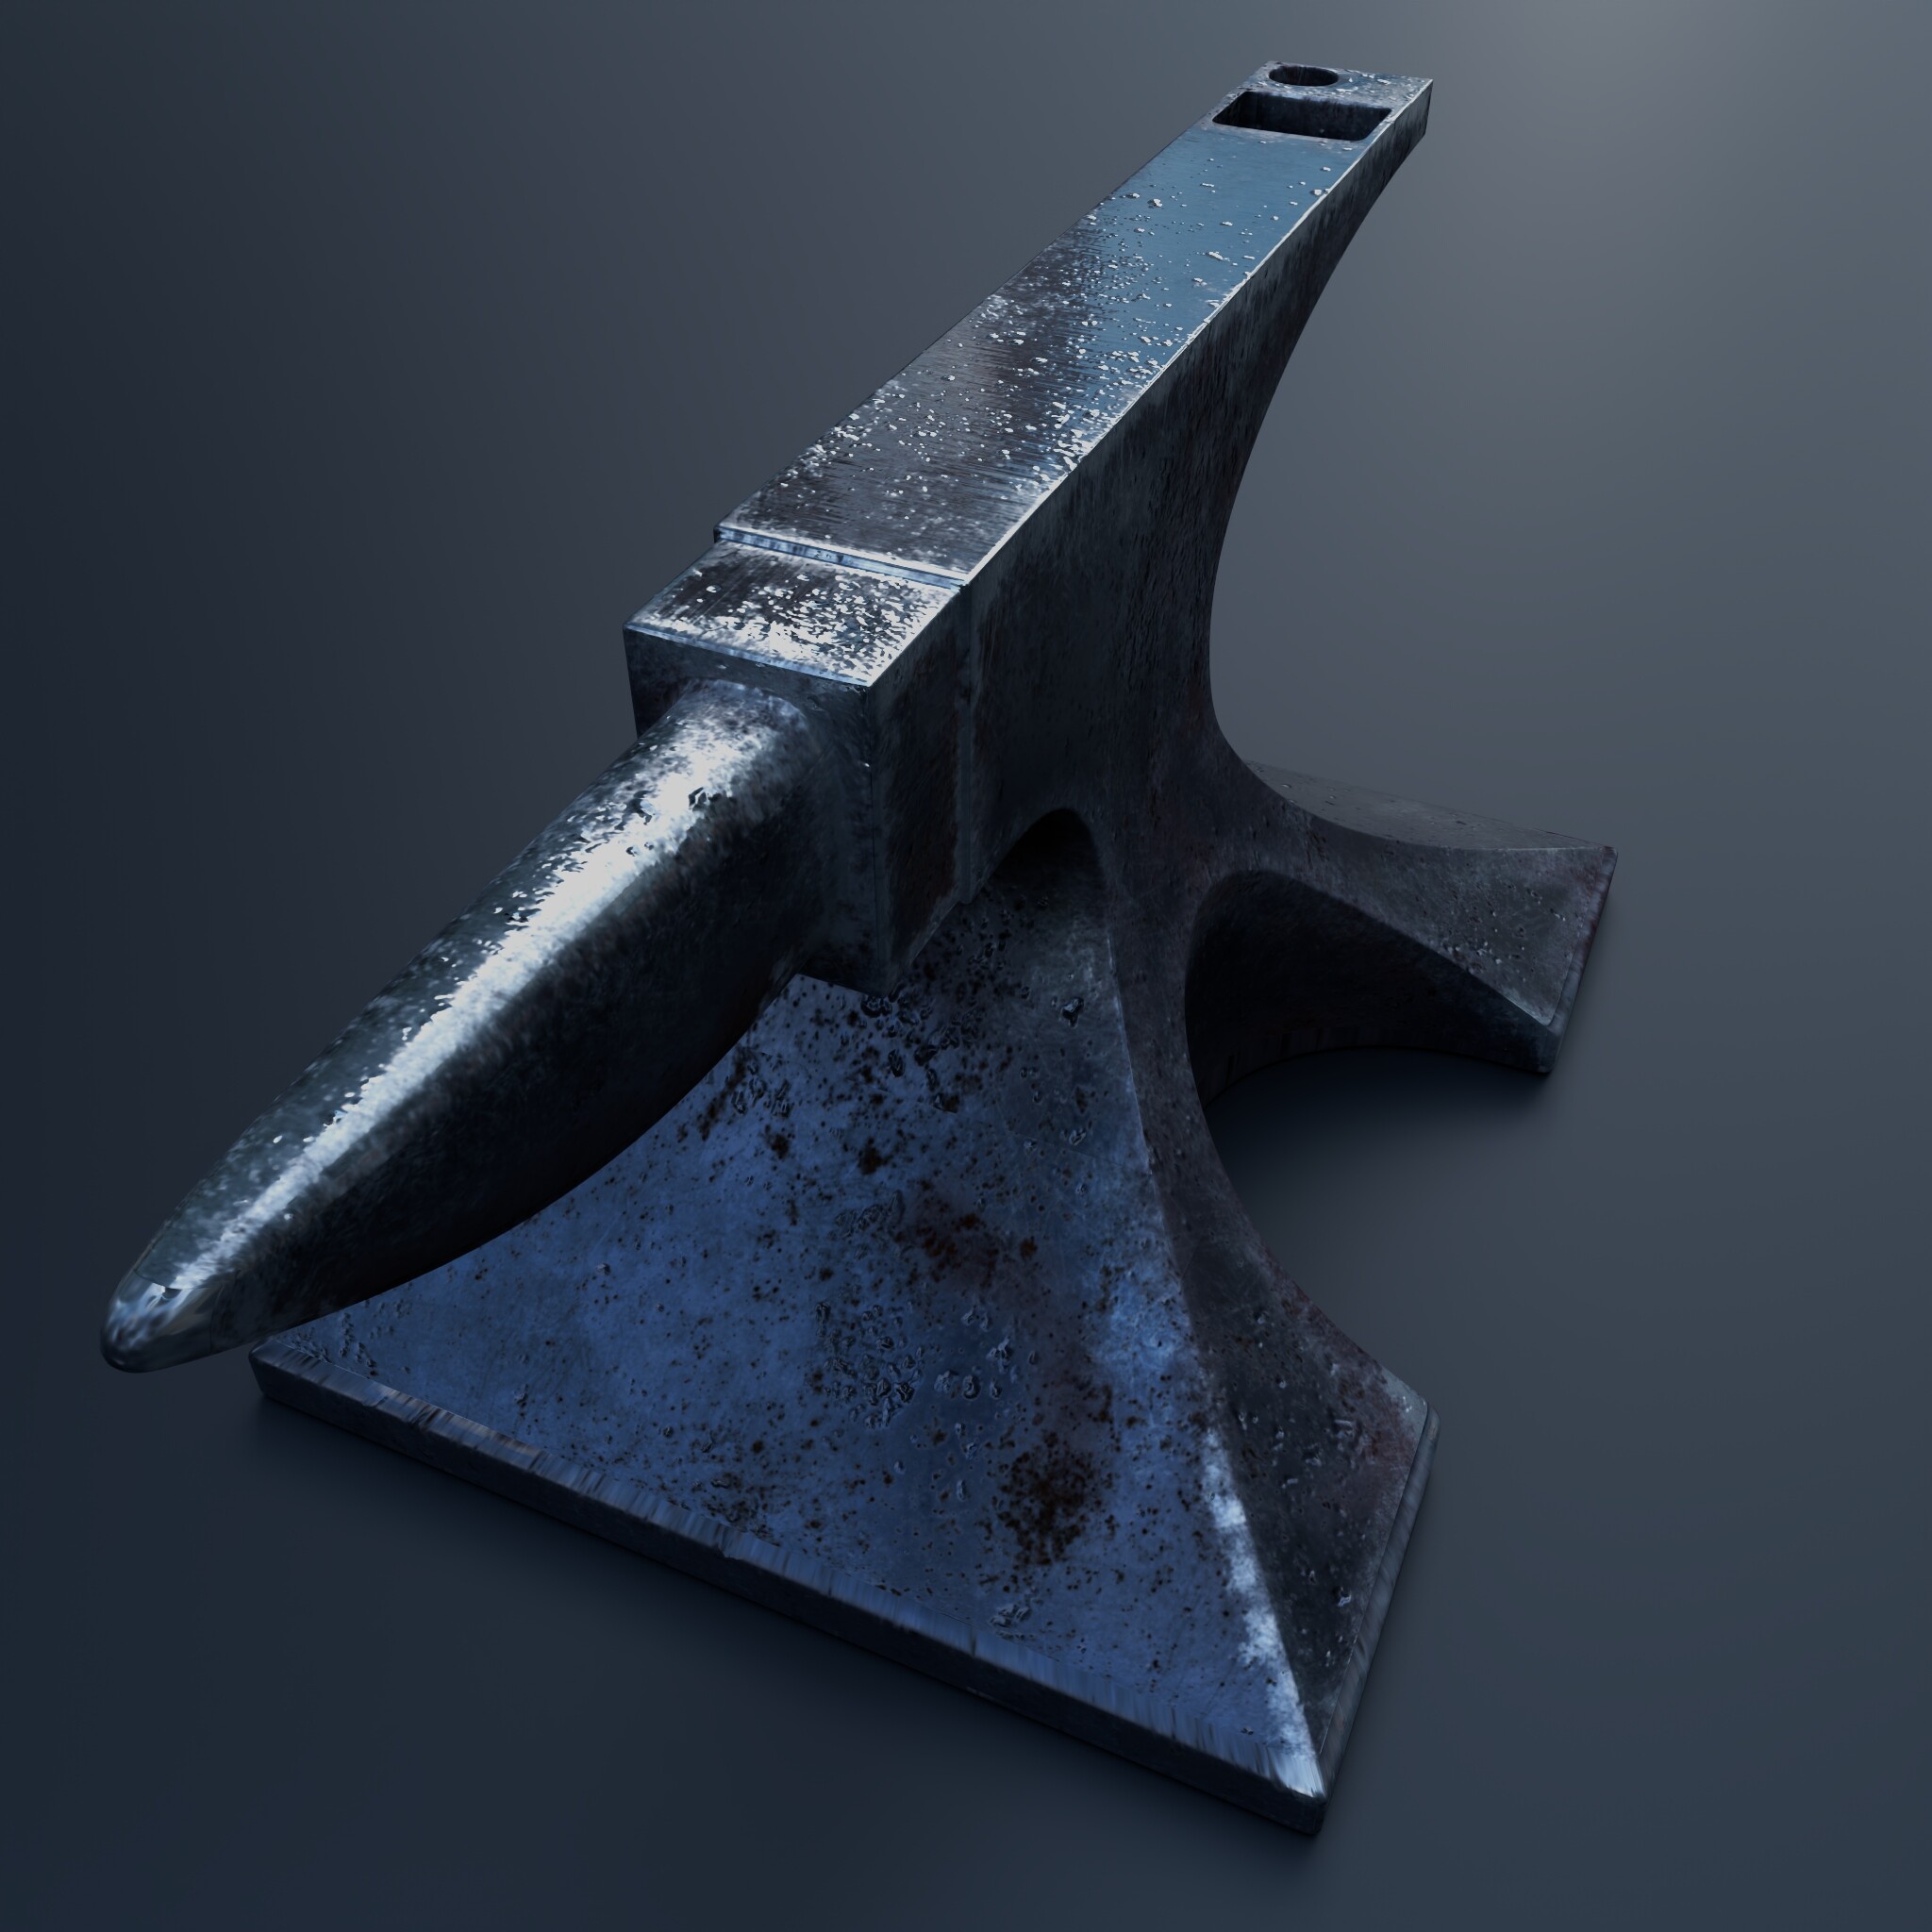 Anvil 2.0 - Finished Projects - Artists Community